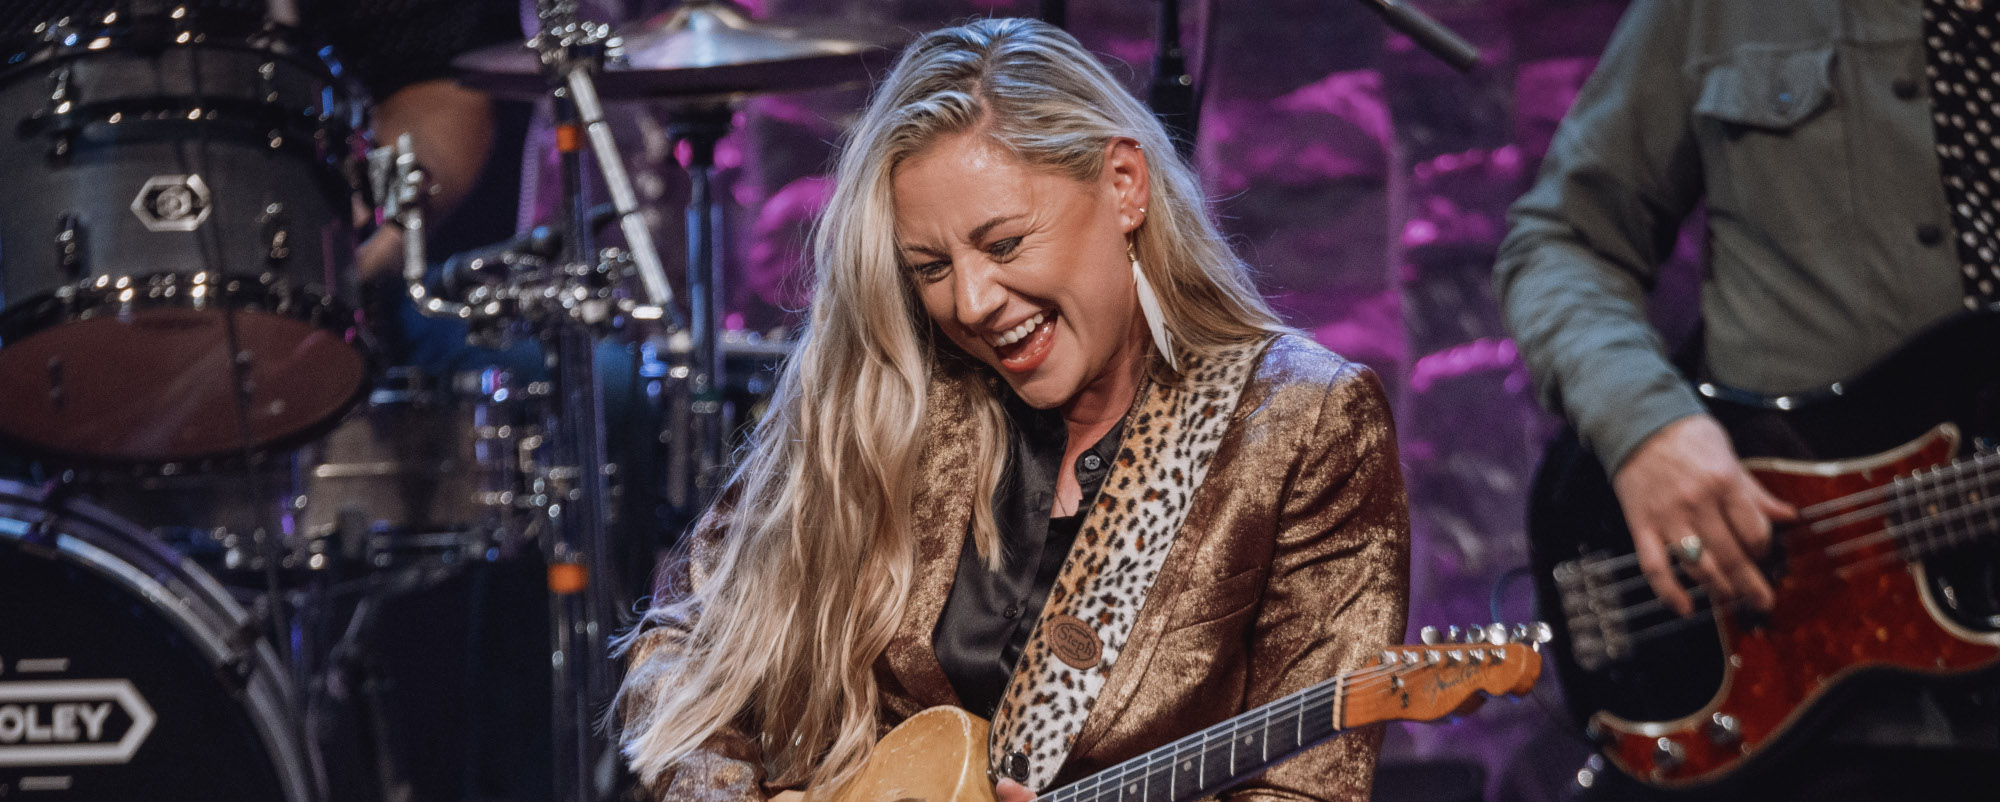 Review: Blues Rocking Guitarist Joanne Shaw Taylor Gets Help From Joe Bonamassa & Others on ‘Blues From The Heart Live’